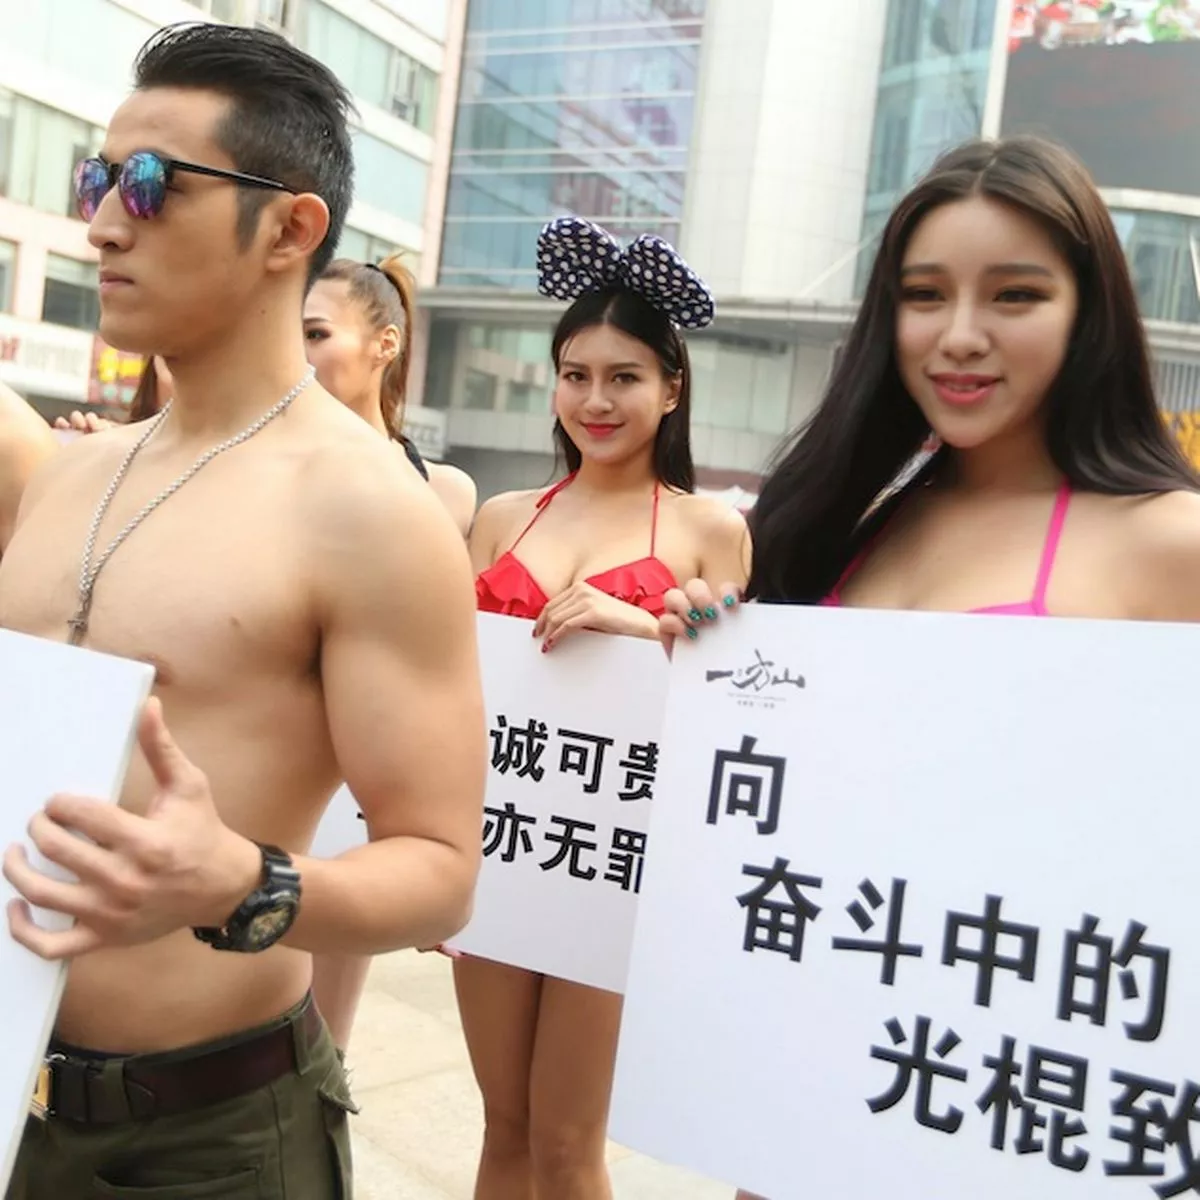 Best of Naked women of china